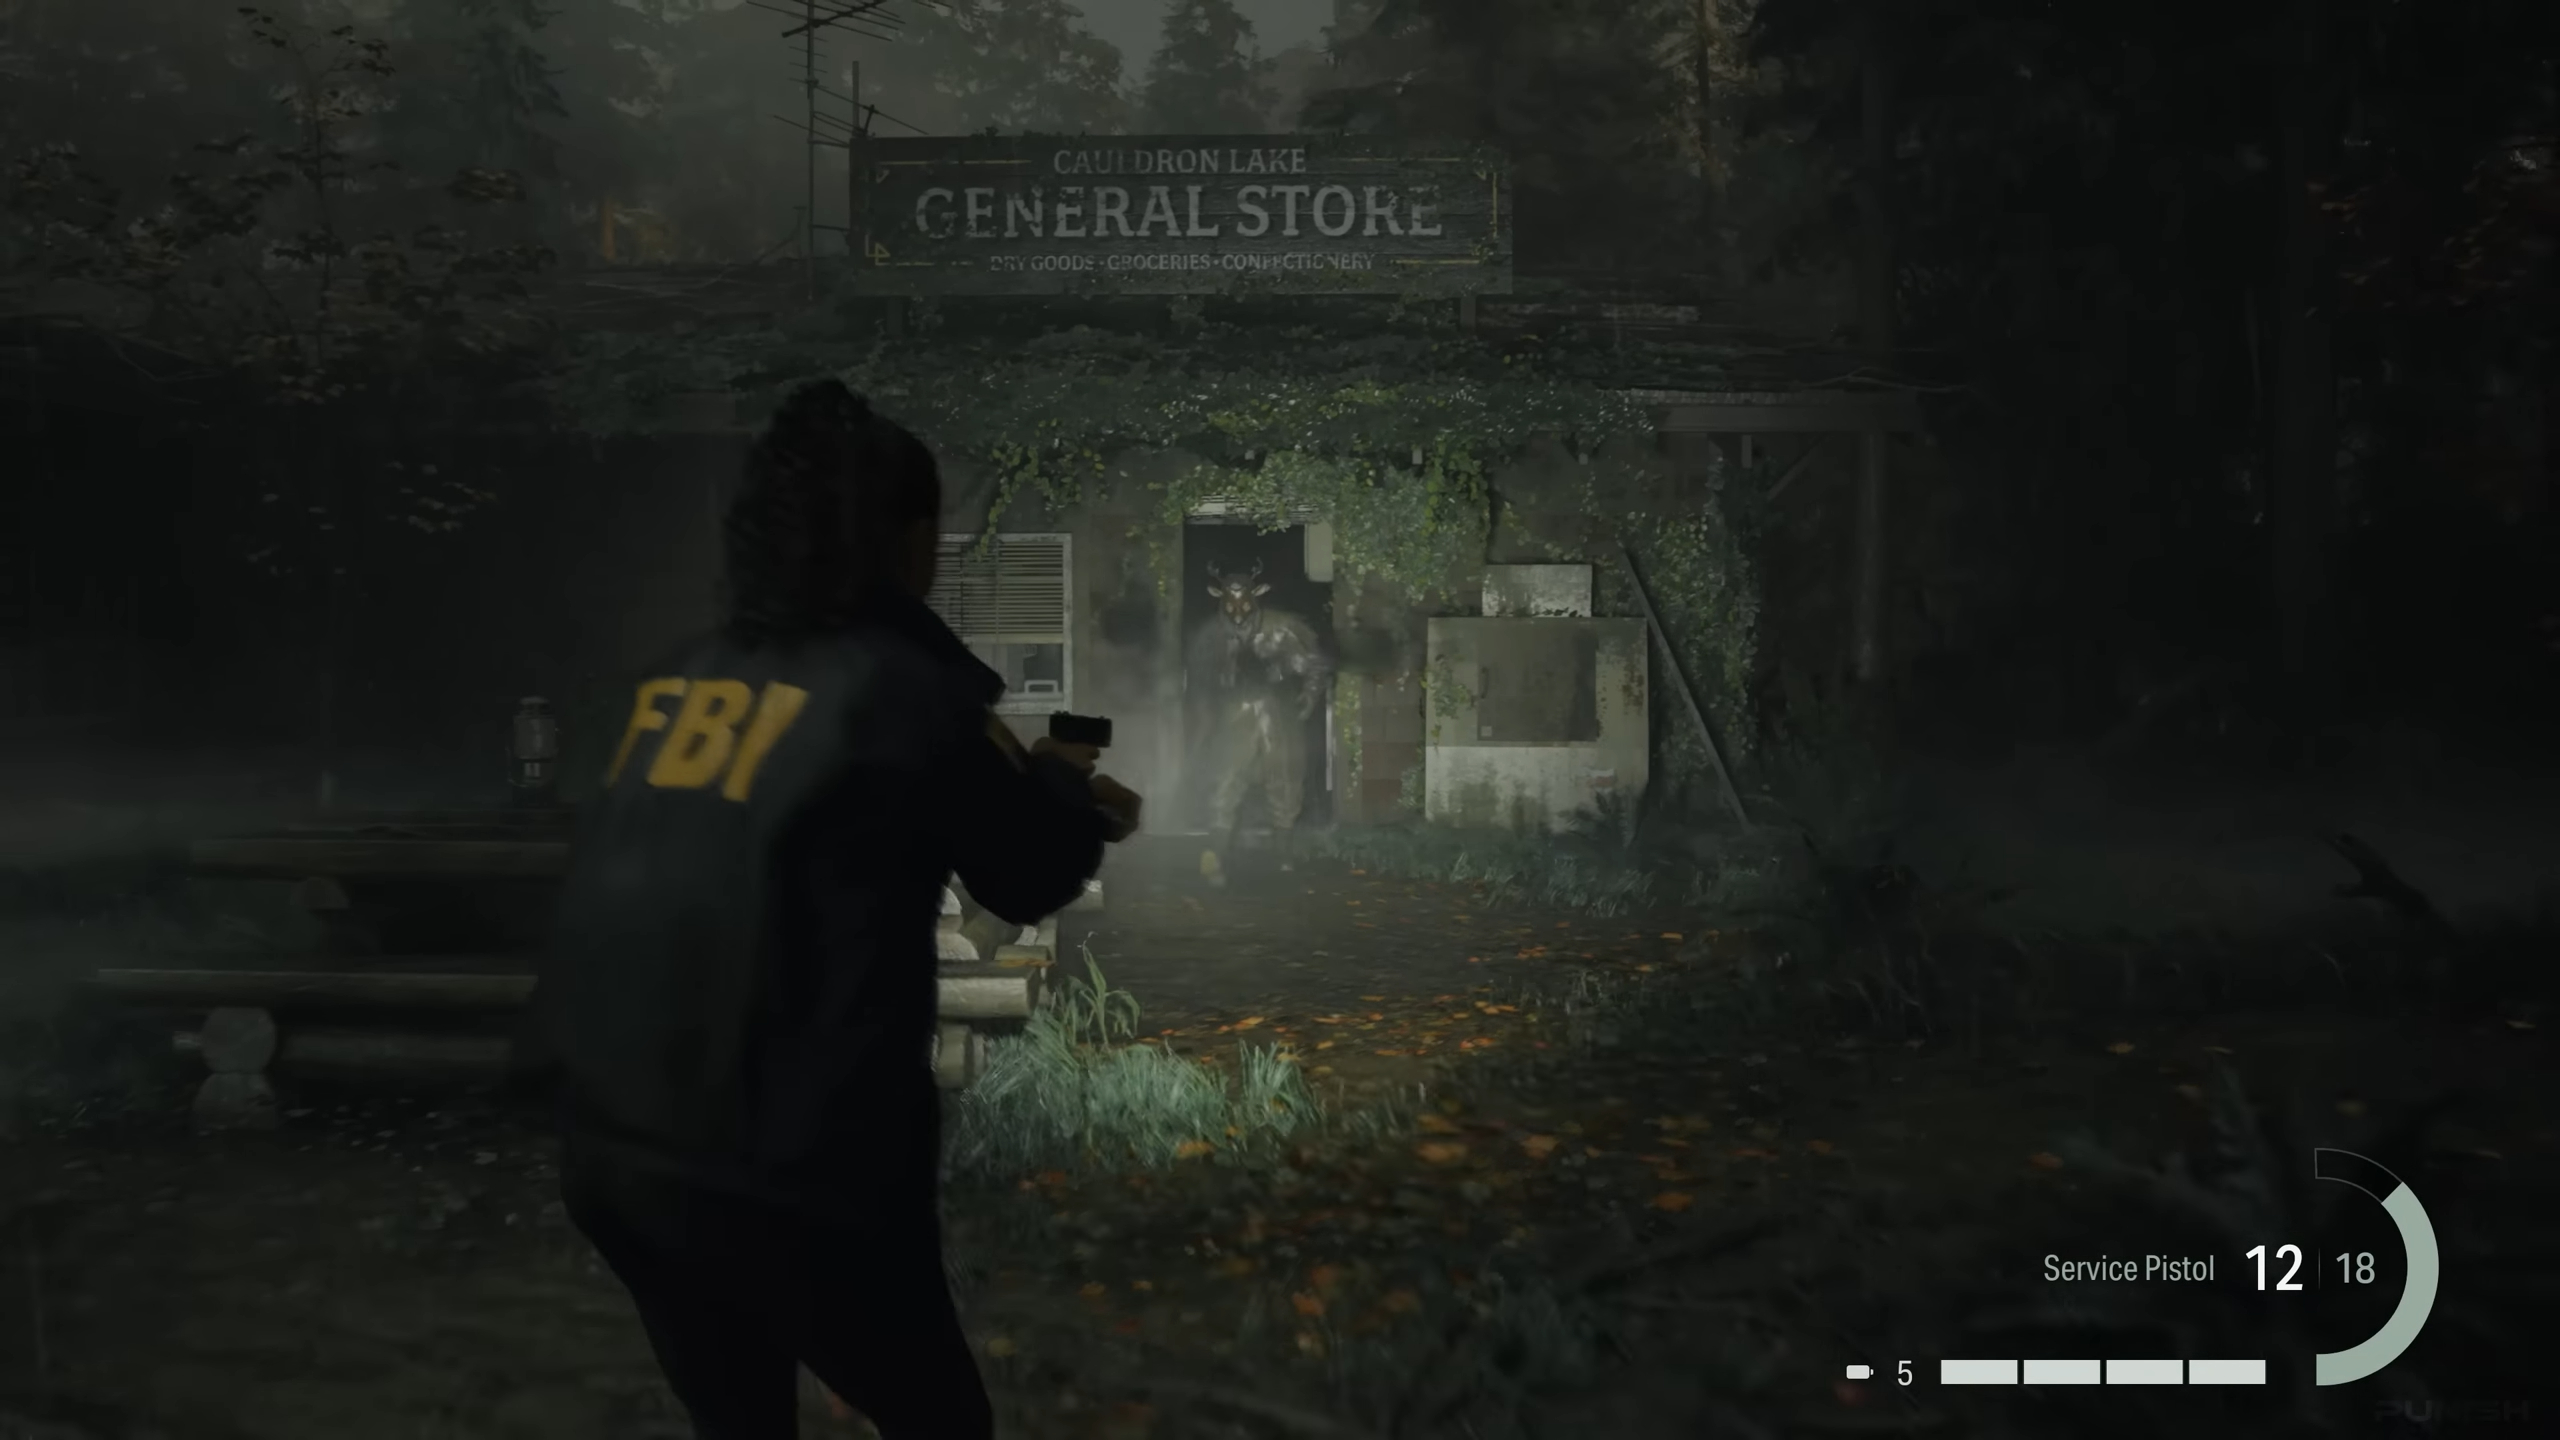 When Does Alan Wake 2 Launch? Release Times Announced - GameSpot